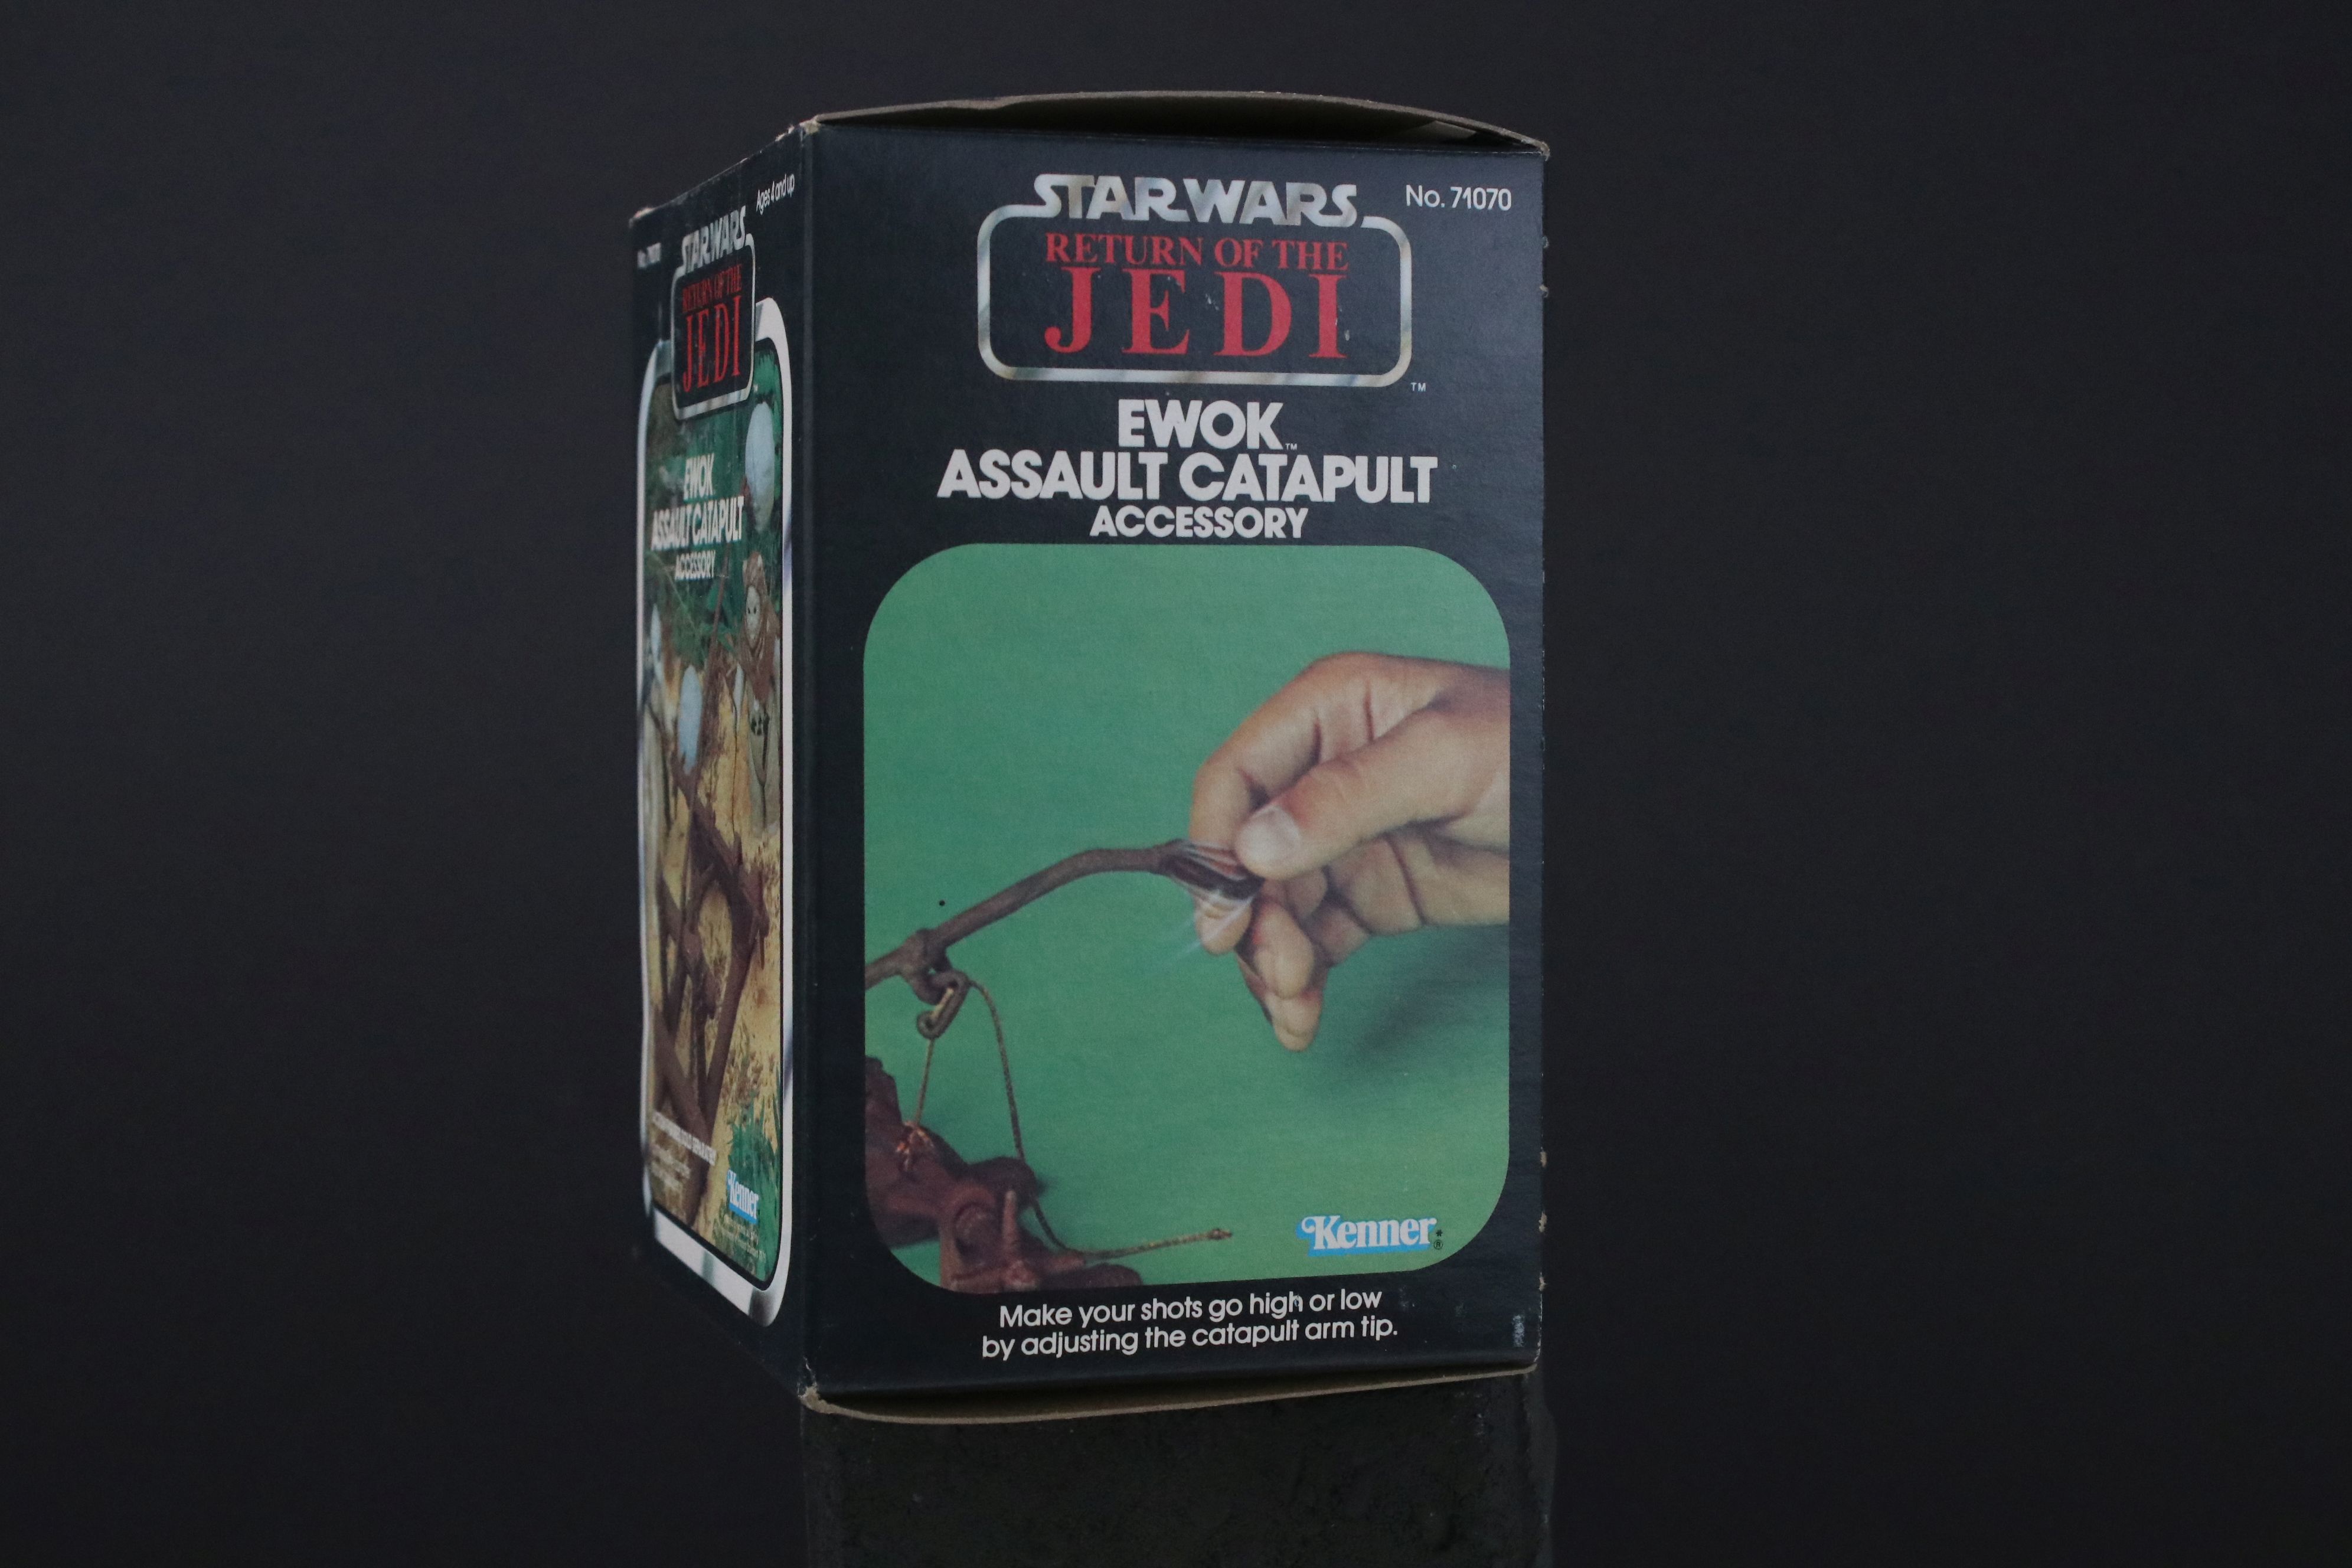 Star Wars - Boxed original Kenner Star Wars Return of the Jedi Ewok Assault Catapult accessory, - Image 2 of 7